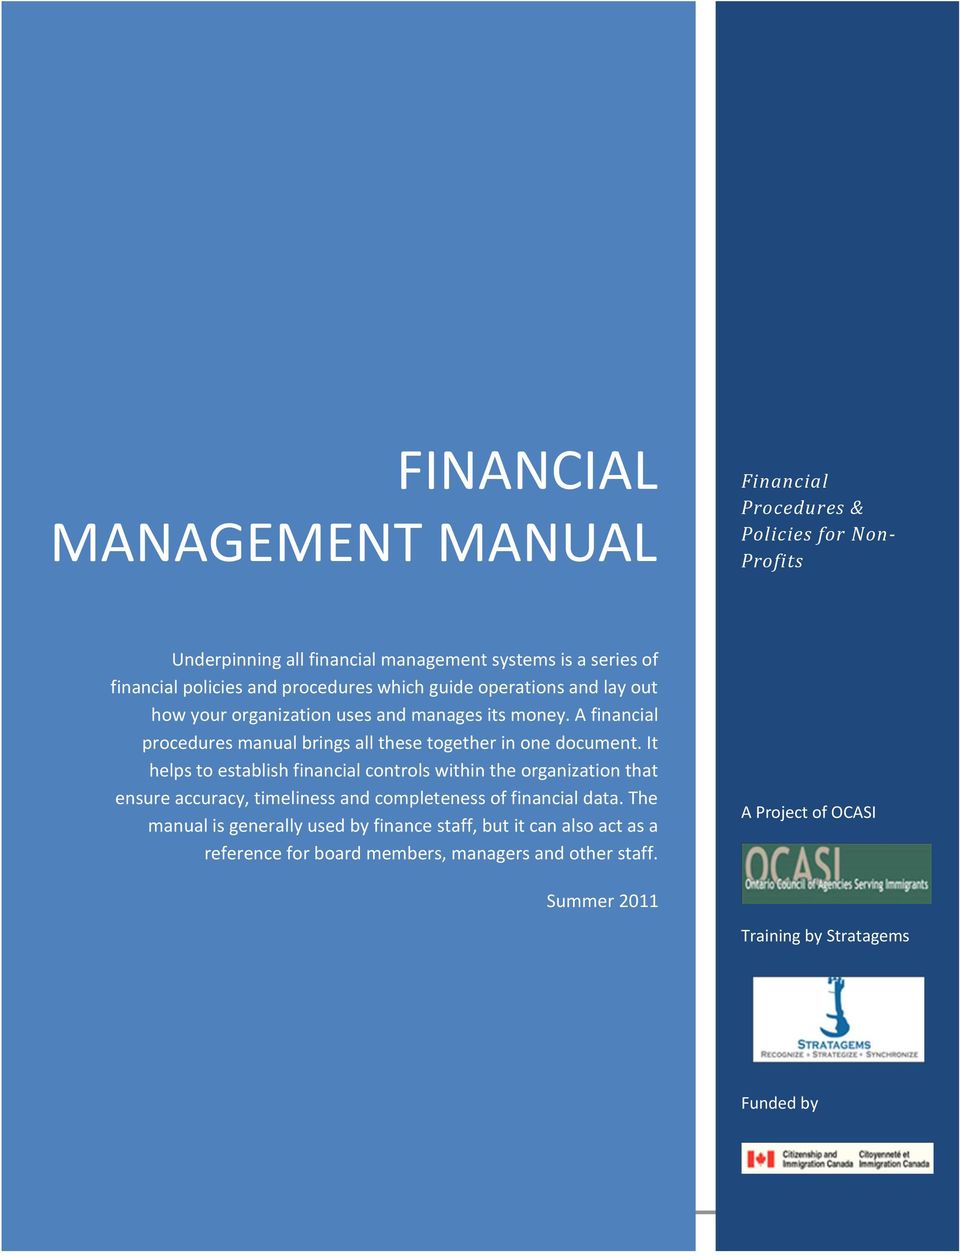 A financial procedures manual brings all these together in one document.